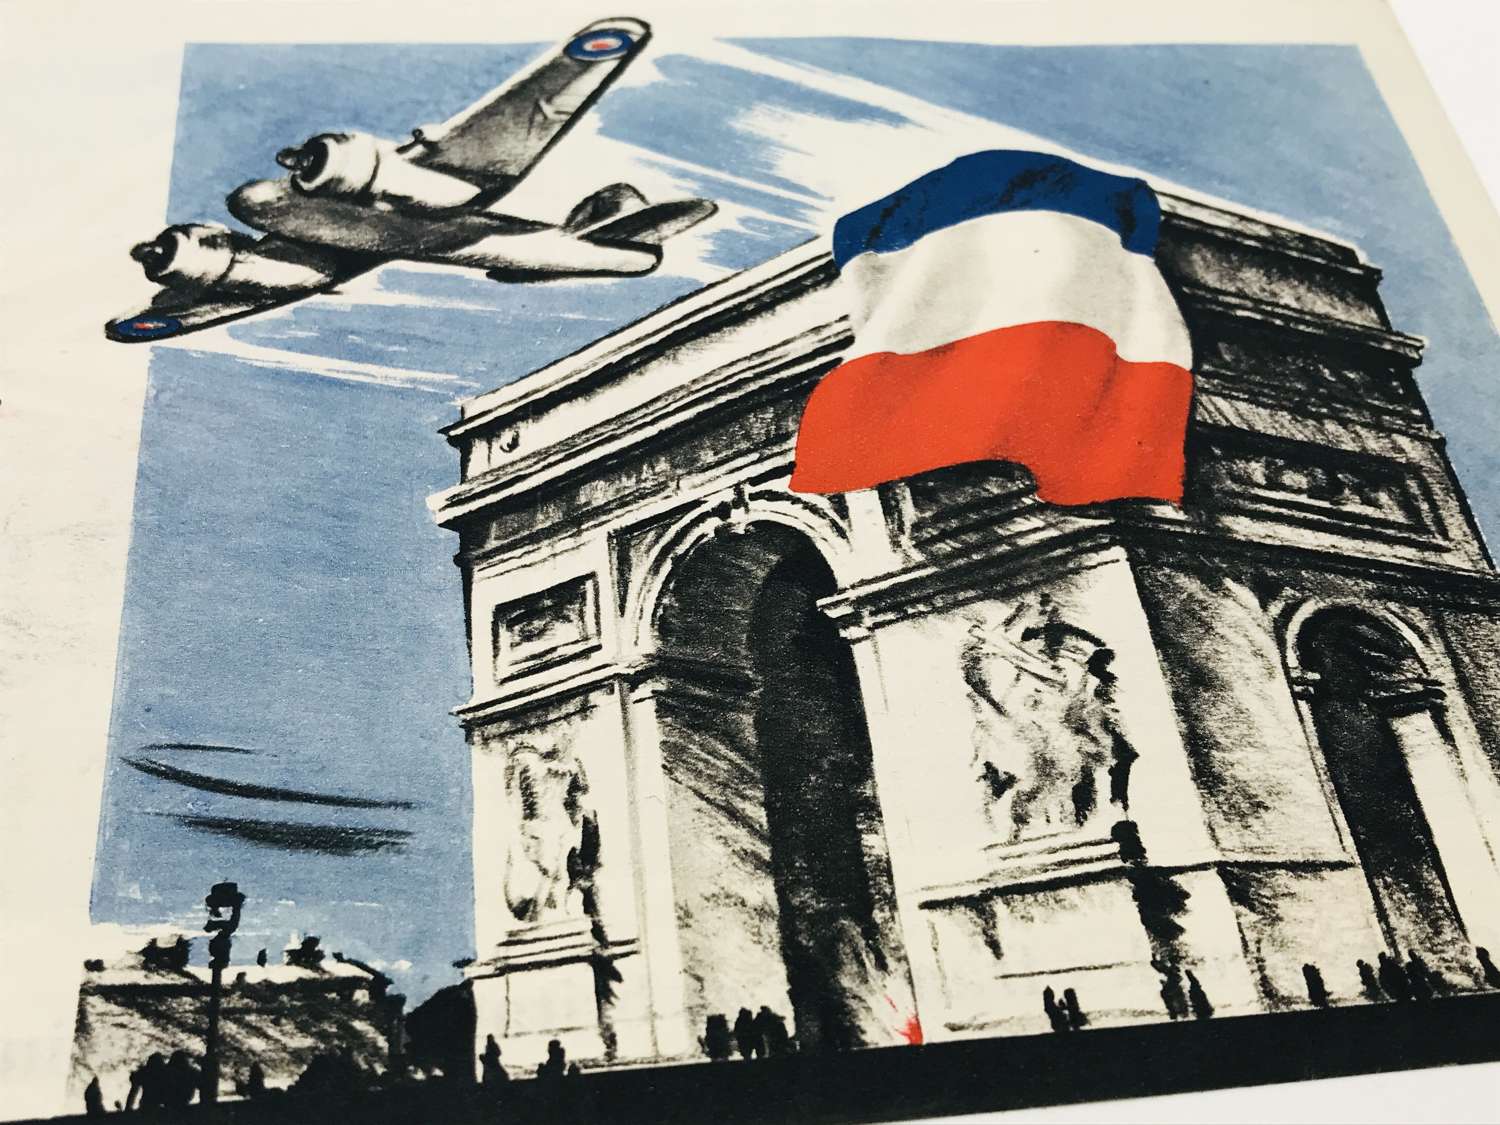 Propaganda leaflet dropping of the tricolour on the Arc de Triomphe